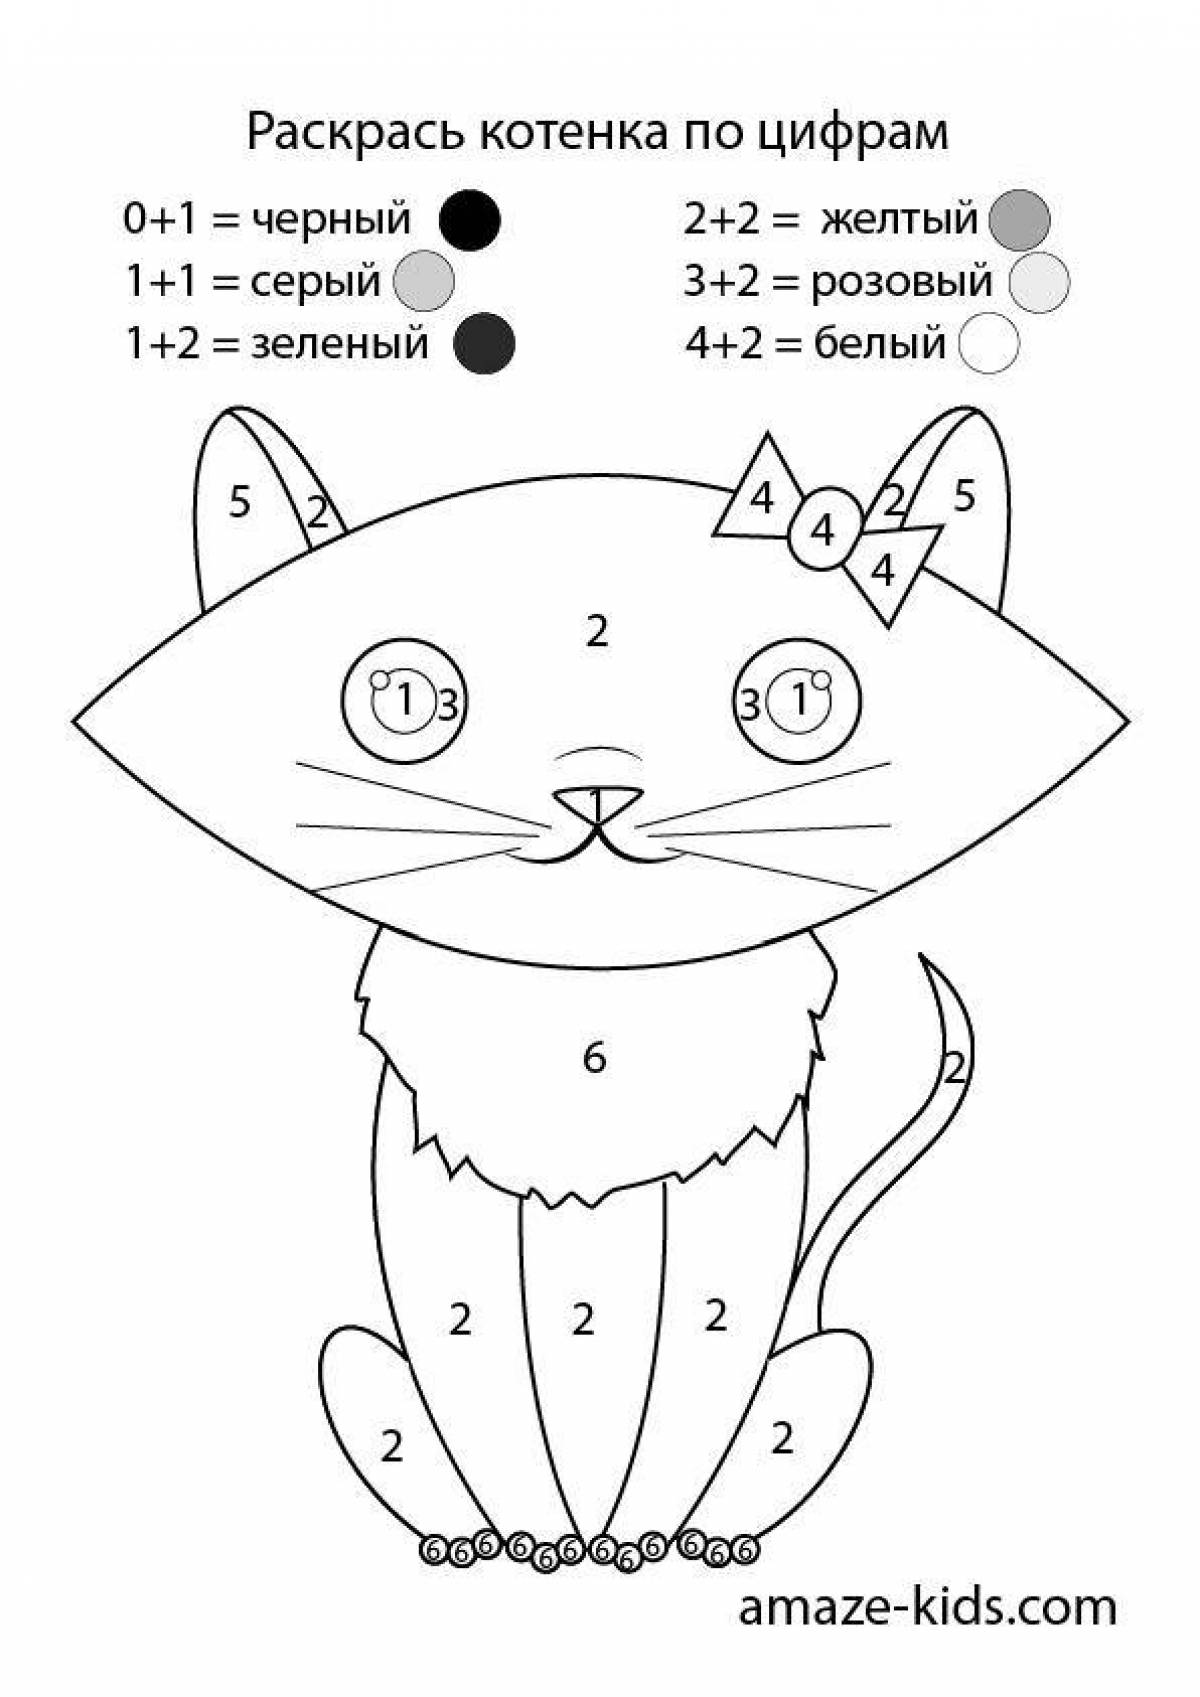 Fairytale cat coloring by numbers